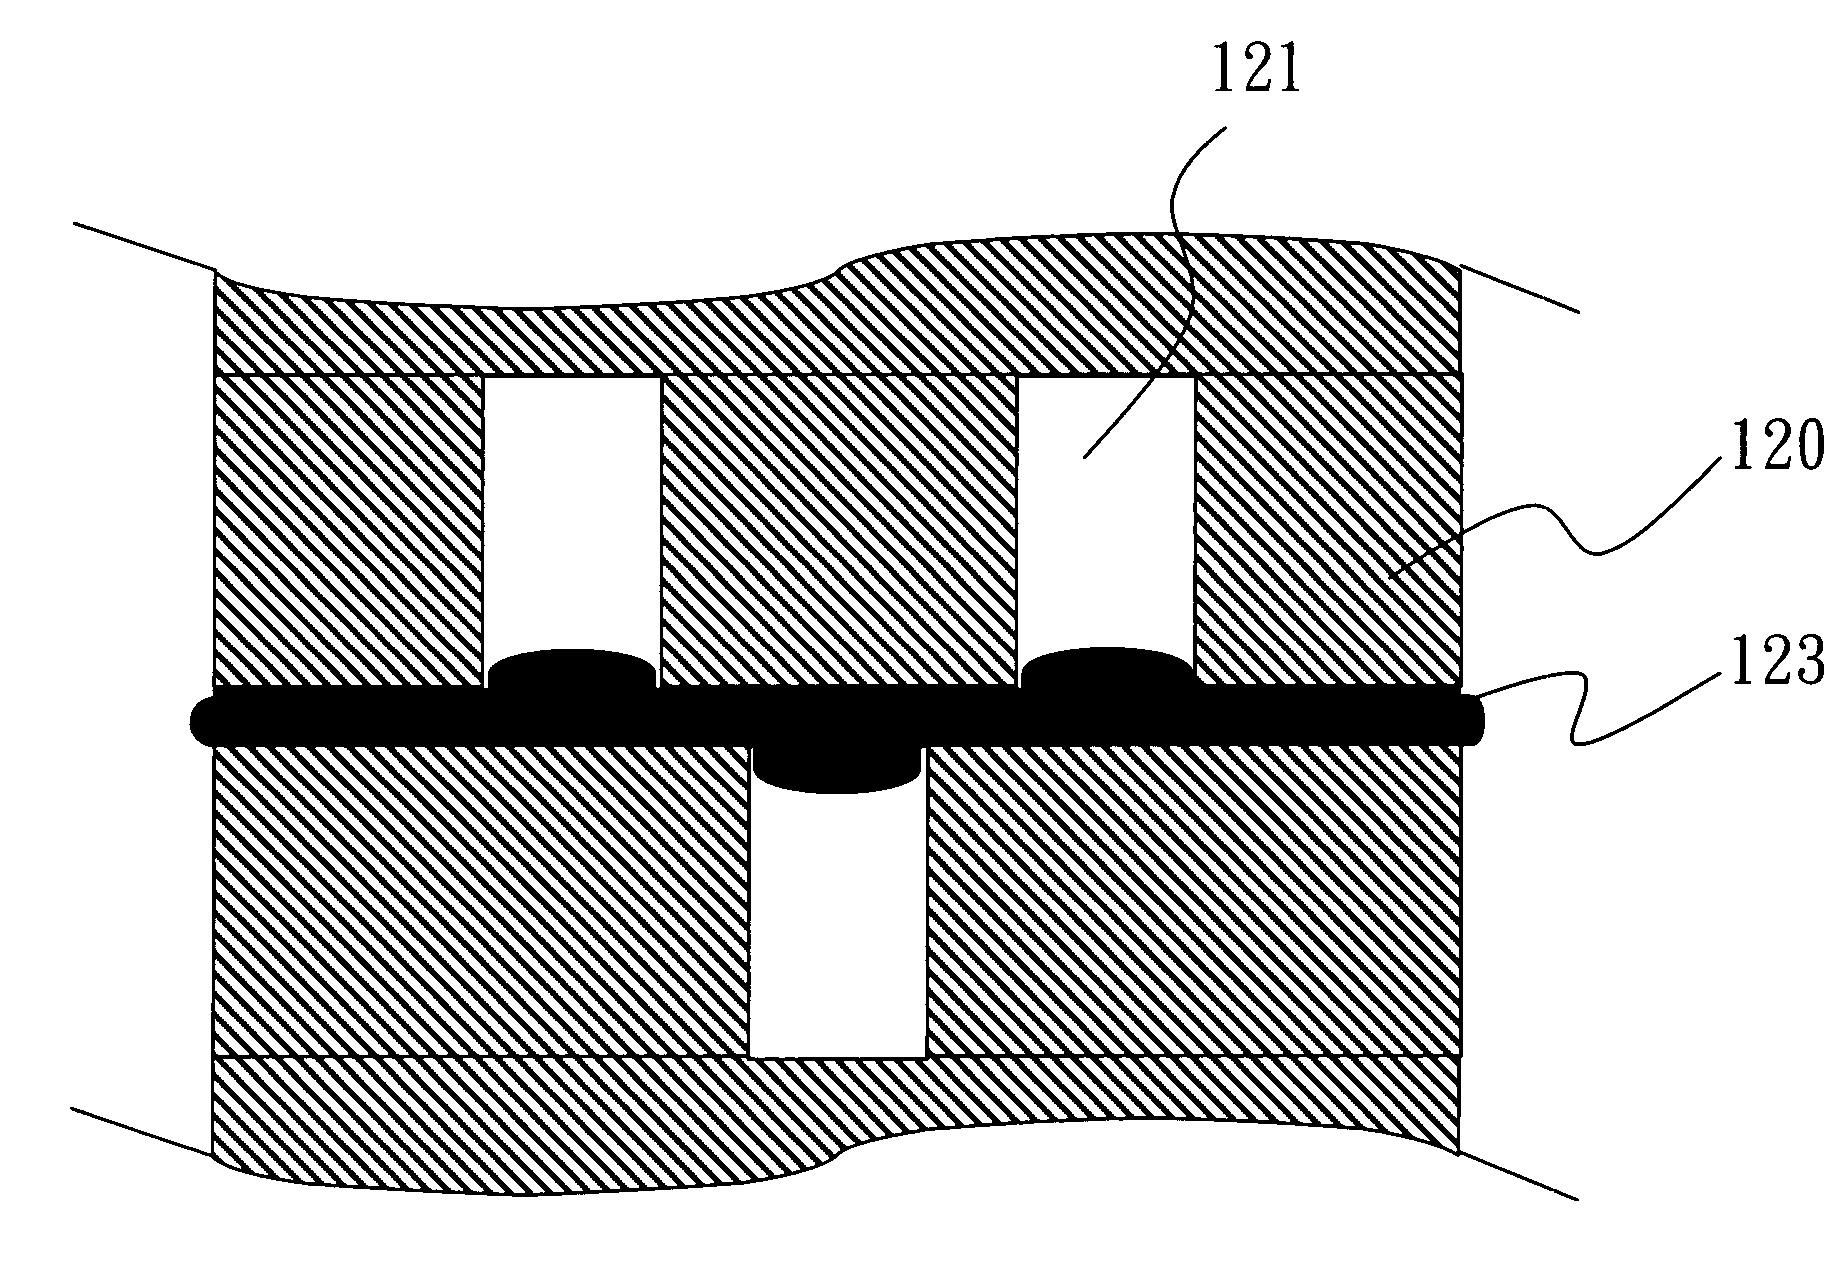 Structure of stacked inkjet head